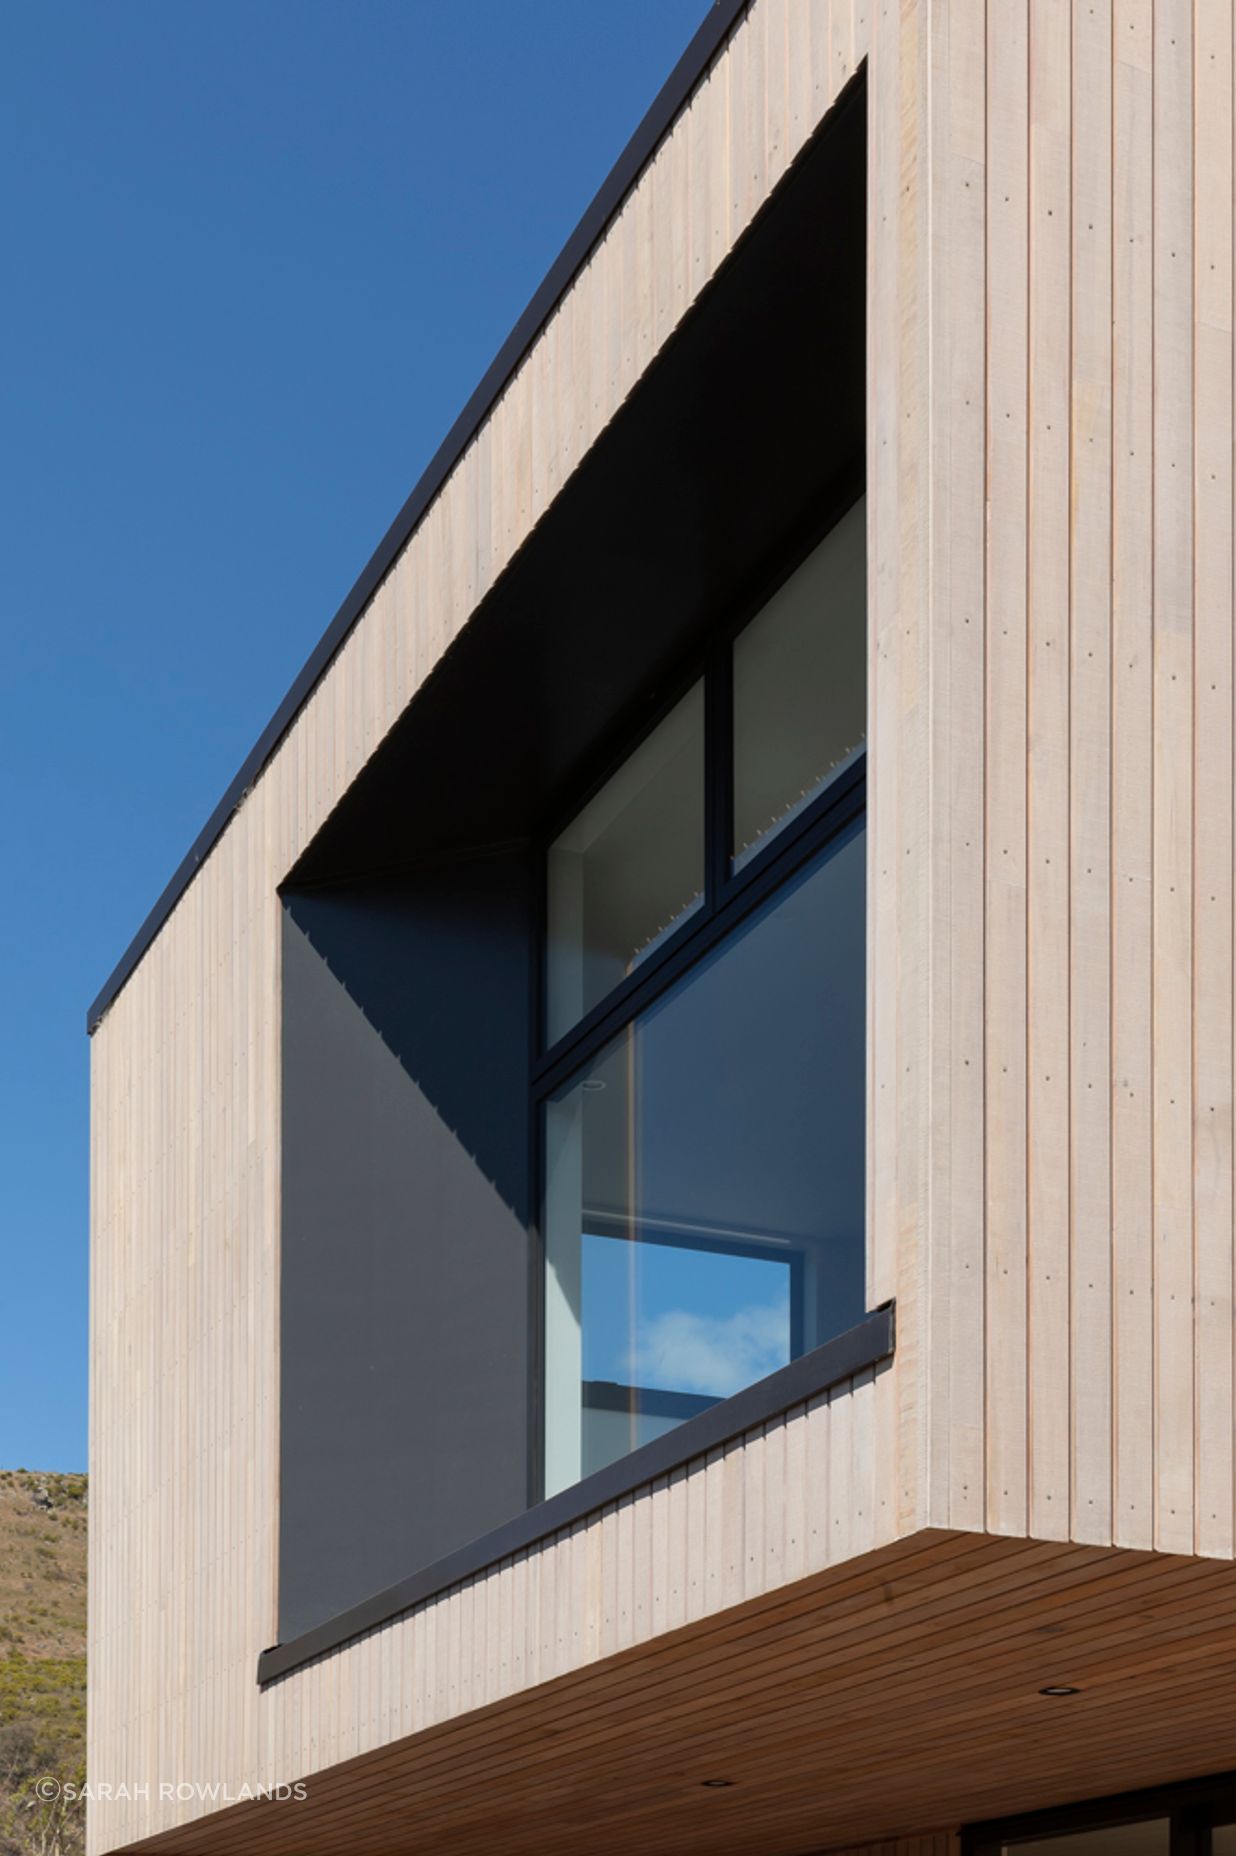 Flaxpod window details by Urban Function Architecture